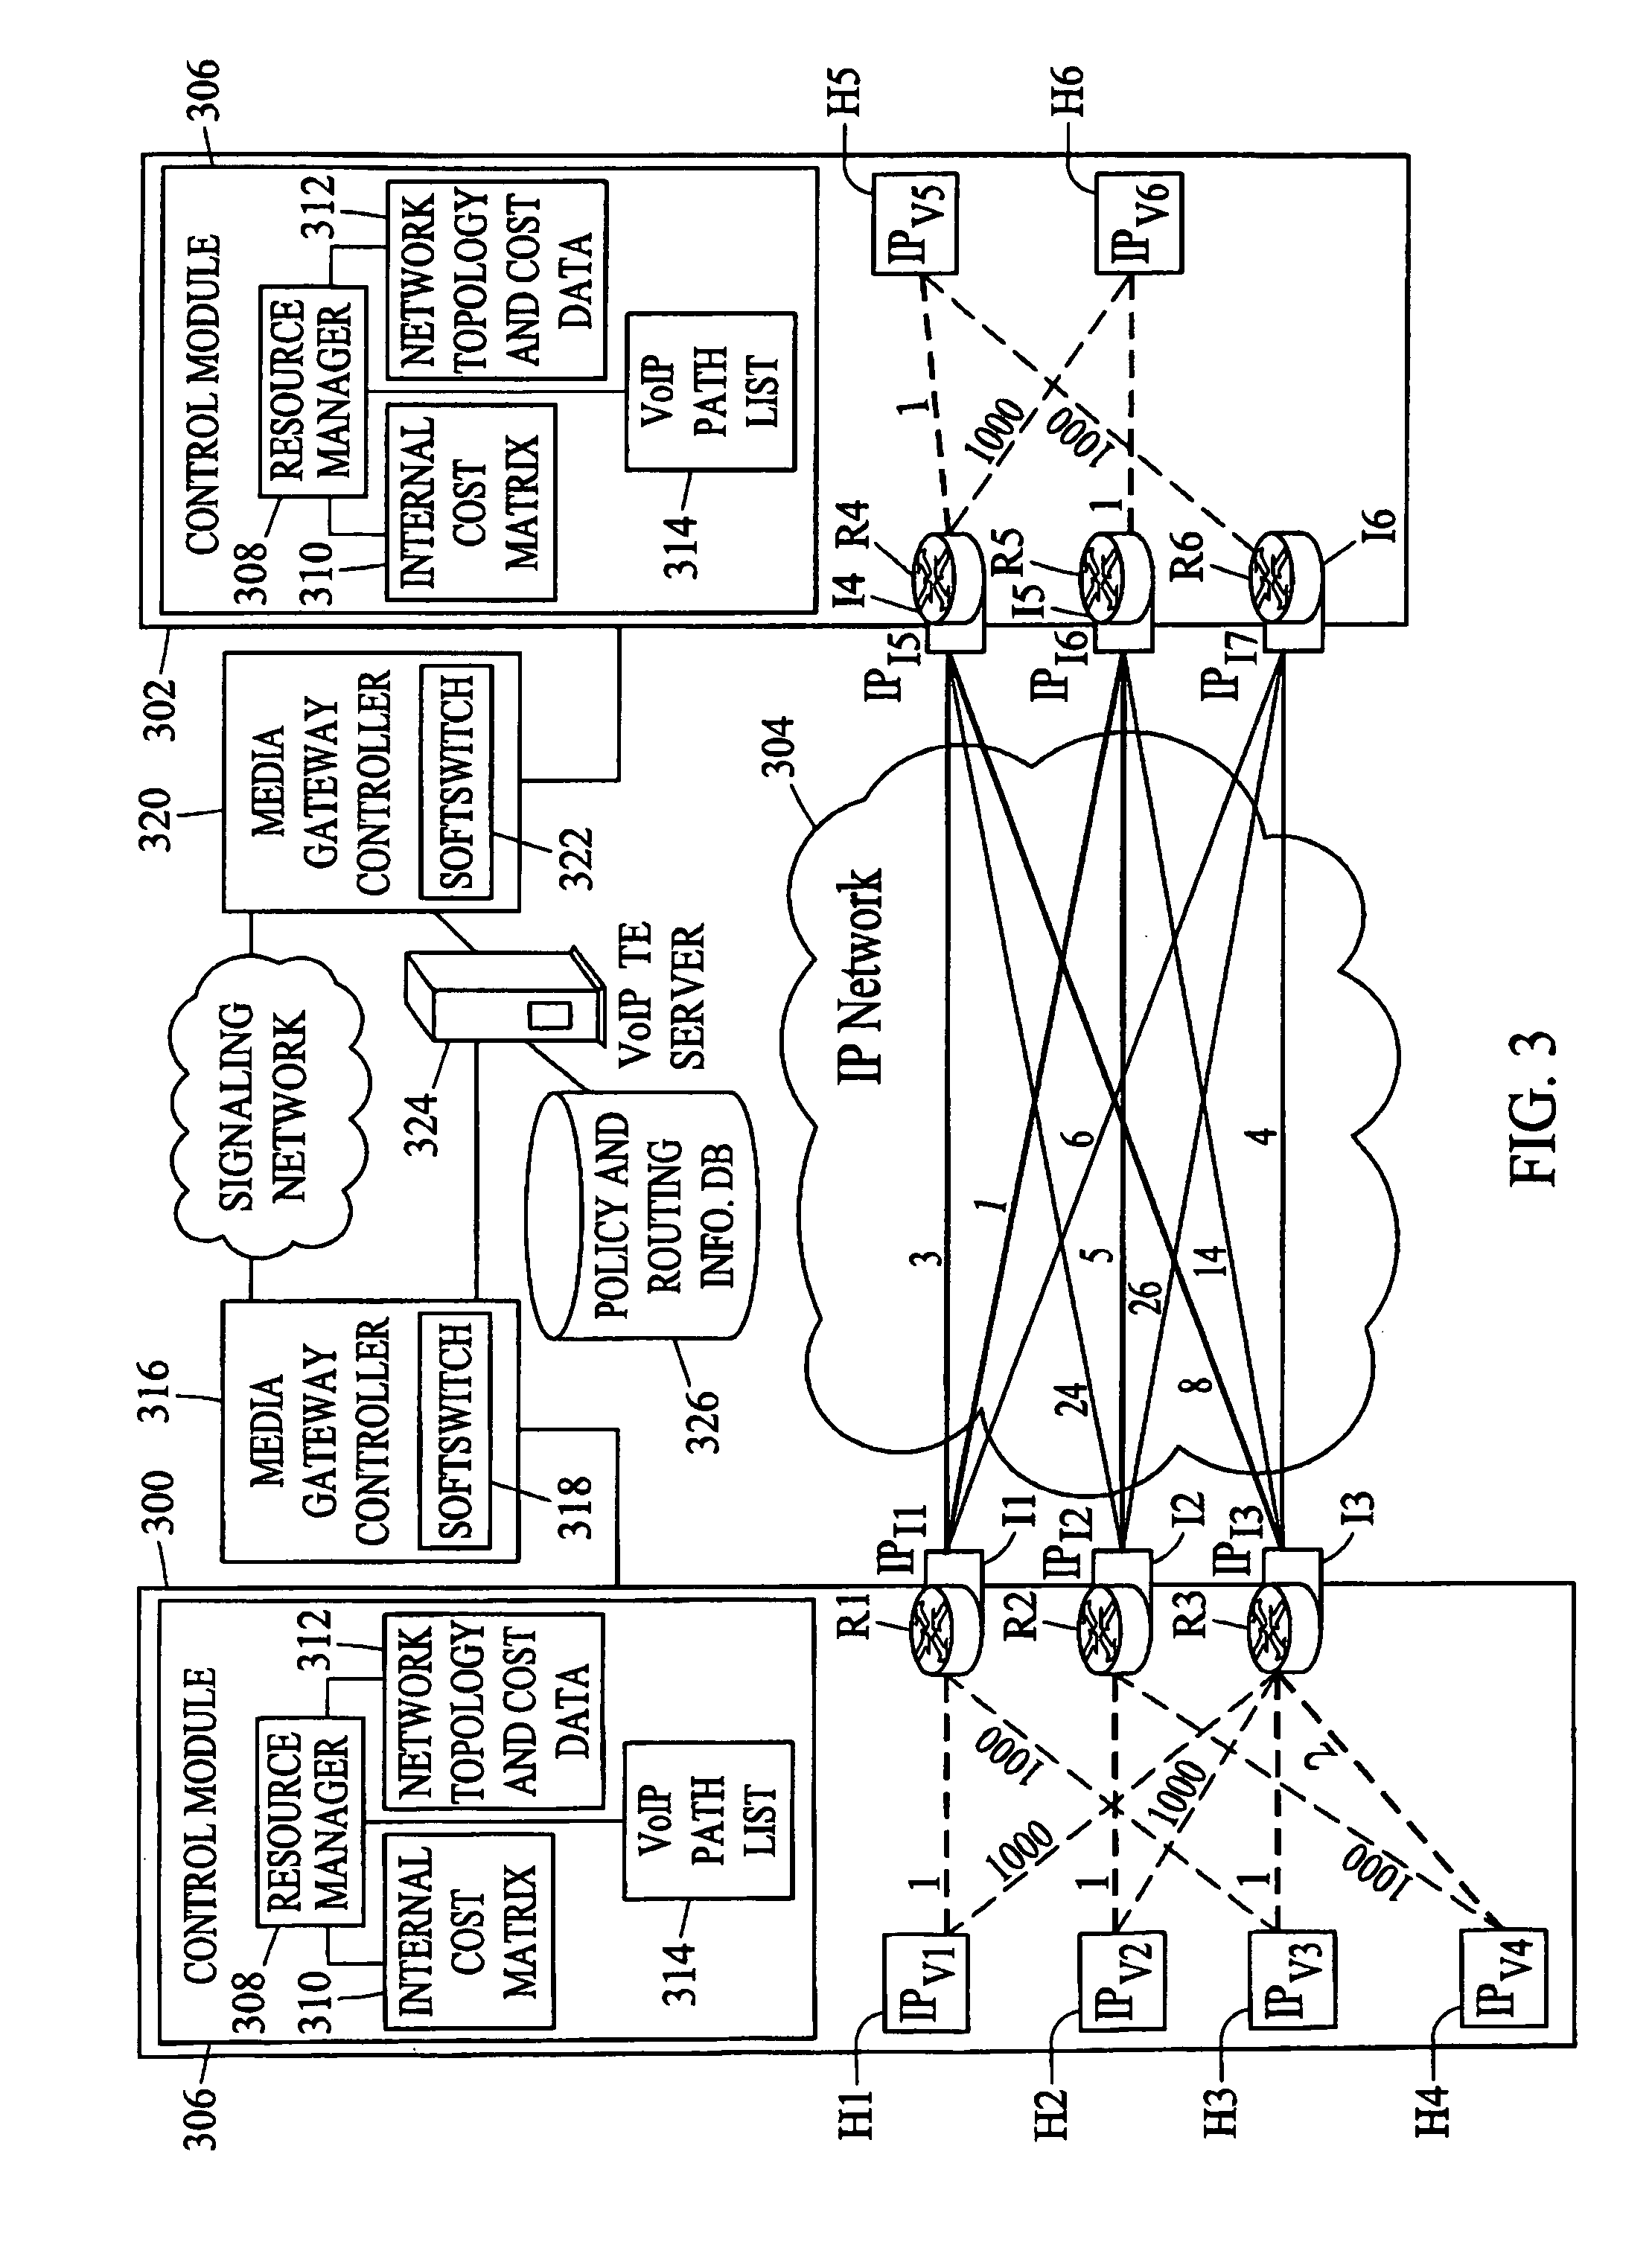 Methods, systems, and computer program products for voice over IP (VOIP) traffic engineering and path resilience using network-aware media gateway